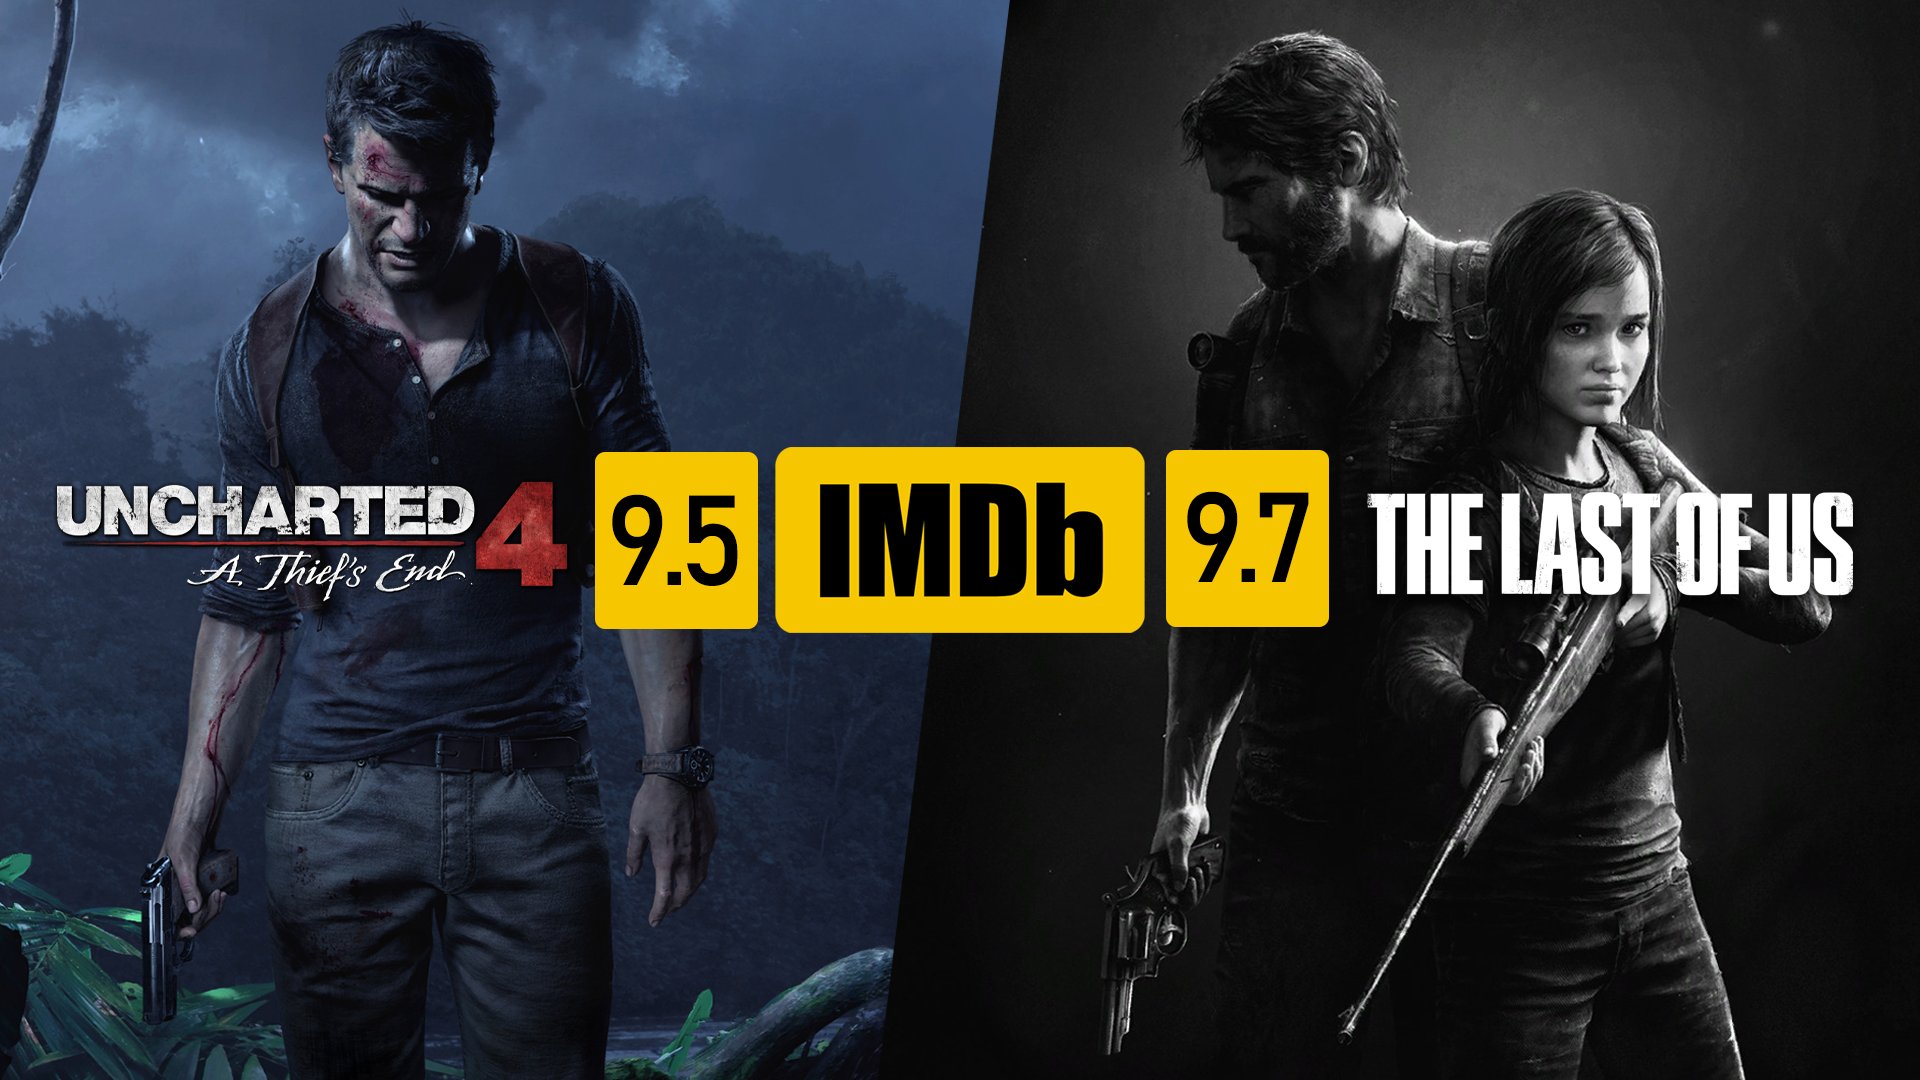 Imdb The Last Of Us Naughty Dog Info on Twitter: "Uncharted 4 has an IMDb score of 9.5 The Last  of Us has an IMDb score of 9.7 This makes them one of the highest rated  video